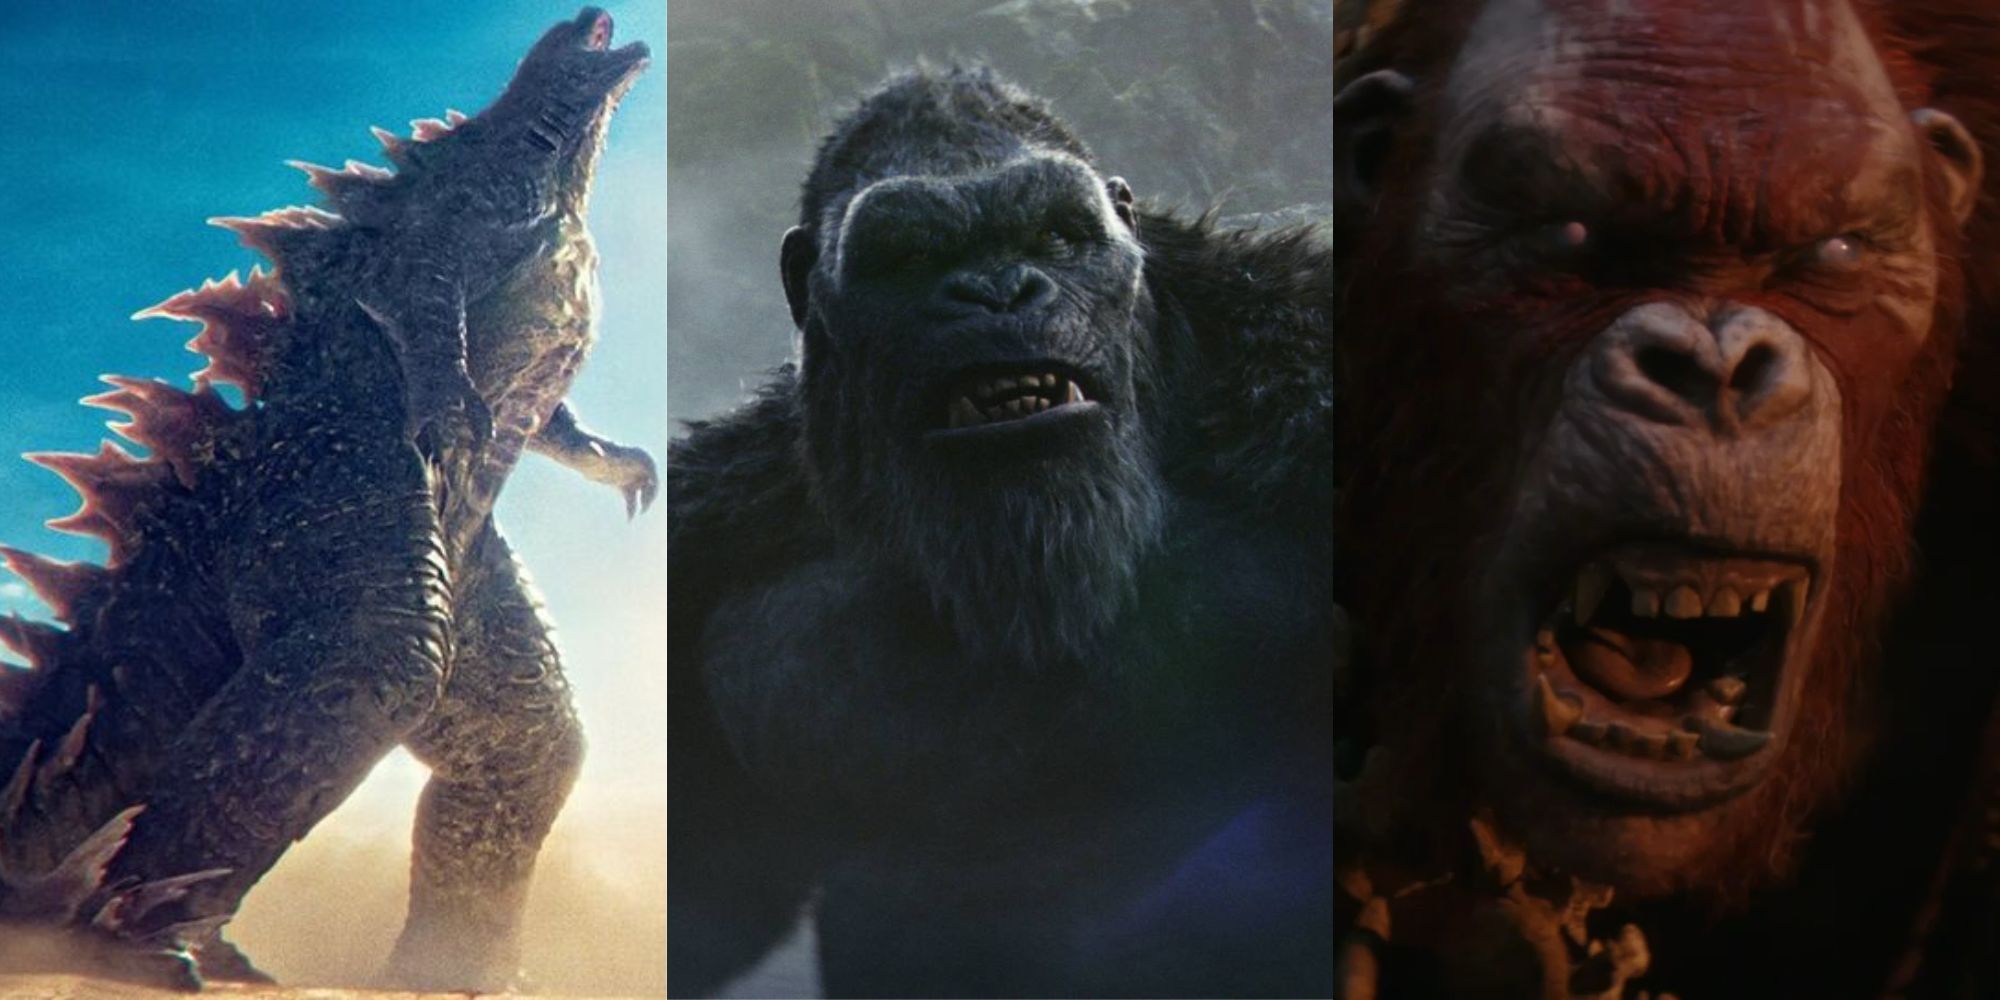 A collage with three of the most prominent kaiju in the film: Godzilla, King Kong and Skar King.